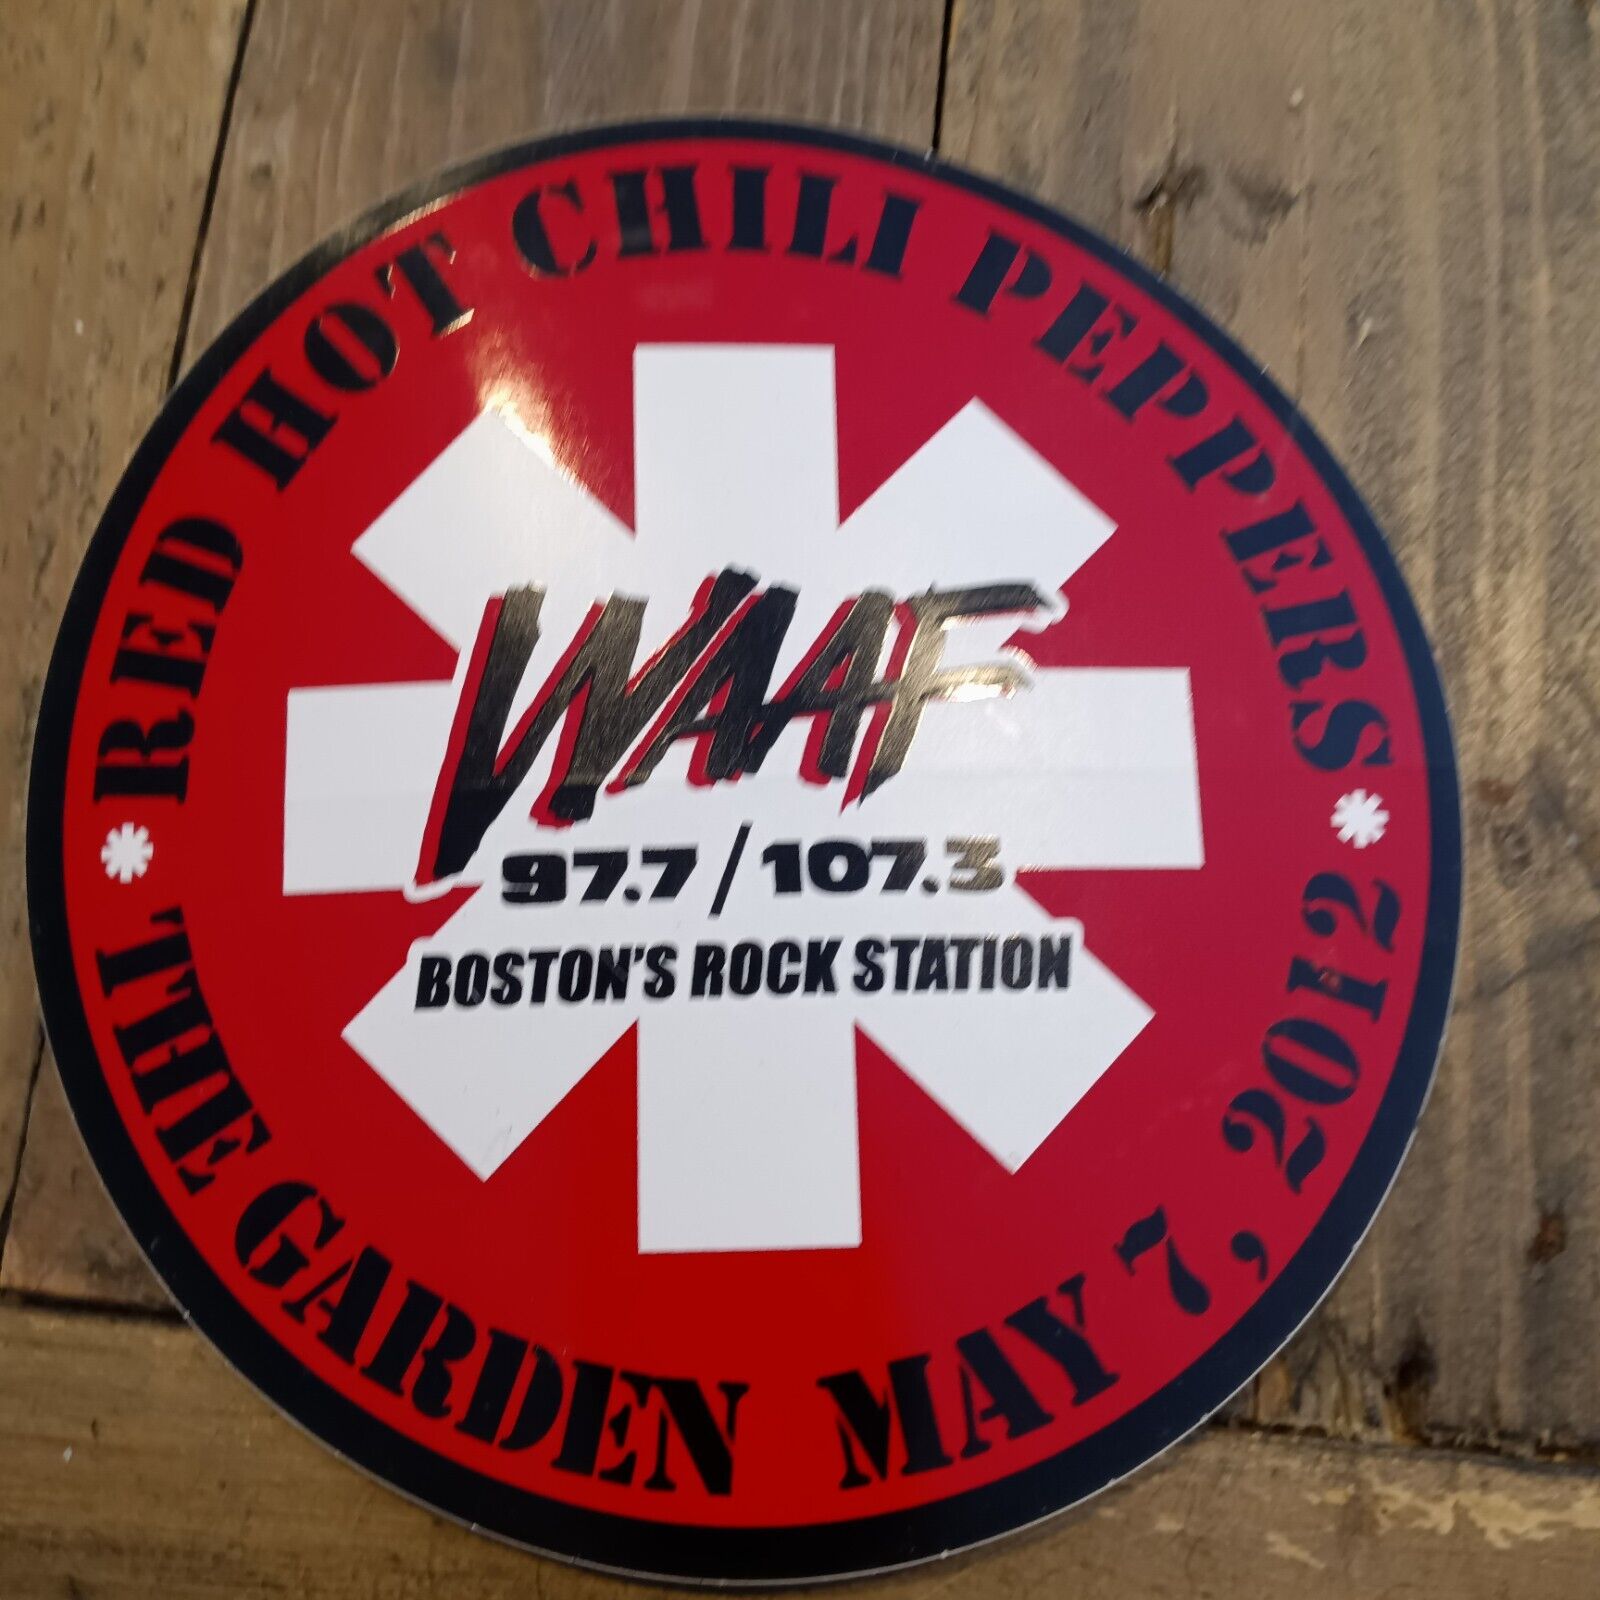 Red Hot Chili Peppers Concert Promo Sticker May 7 2012 Waaf 107.3 Rare